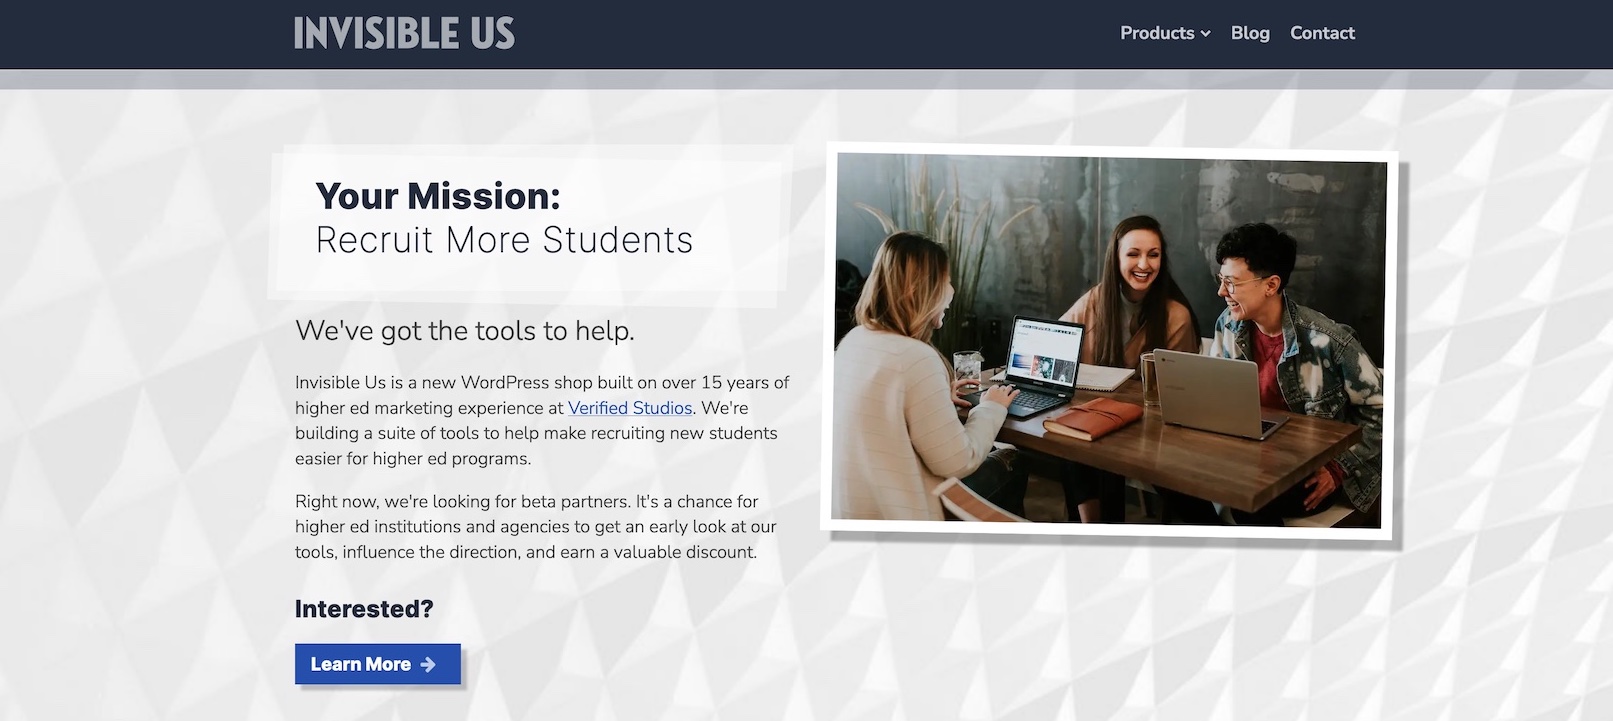 Invisible Us Presents Higher Ed Student Recruitment Tools